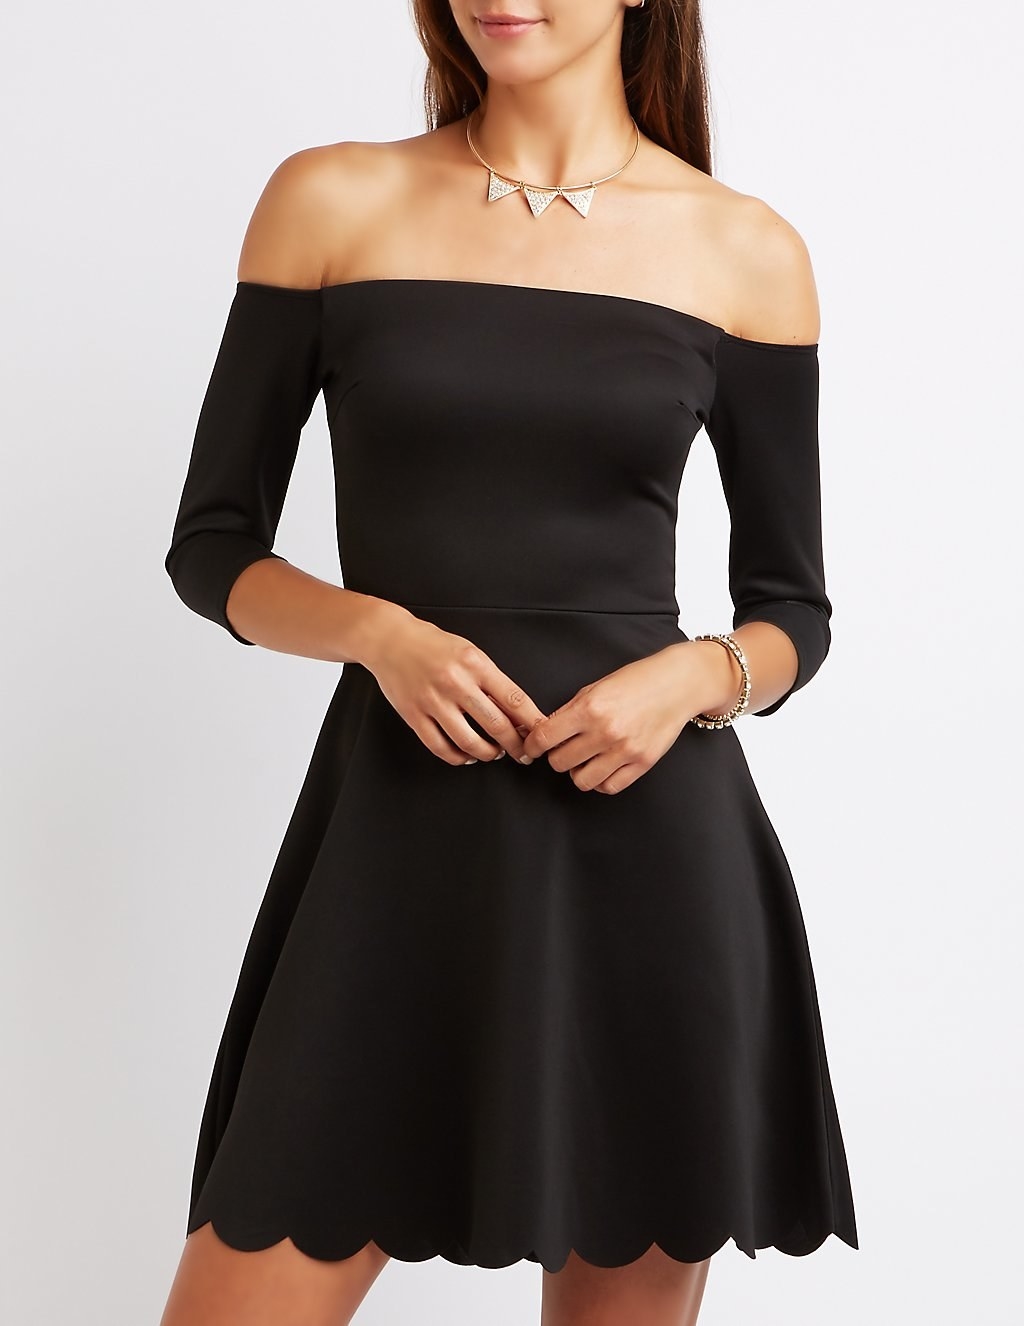 30 Beautiful And Inexpensive Dresses You'll Want To Wear Every Day